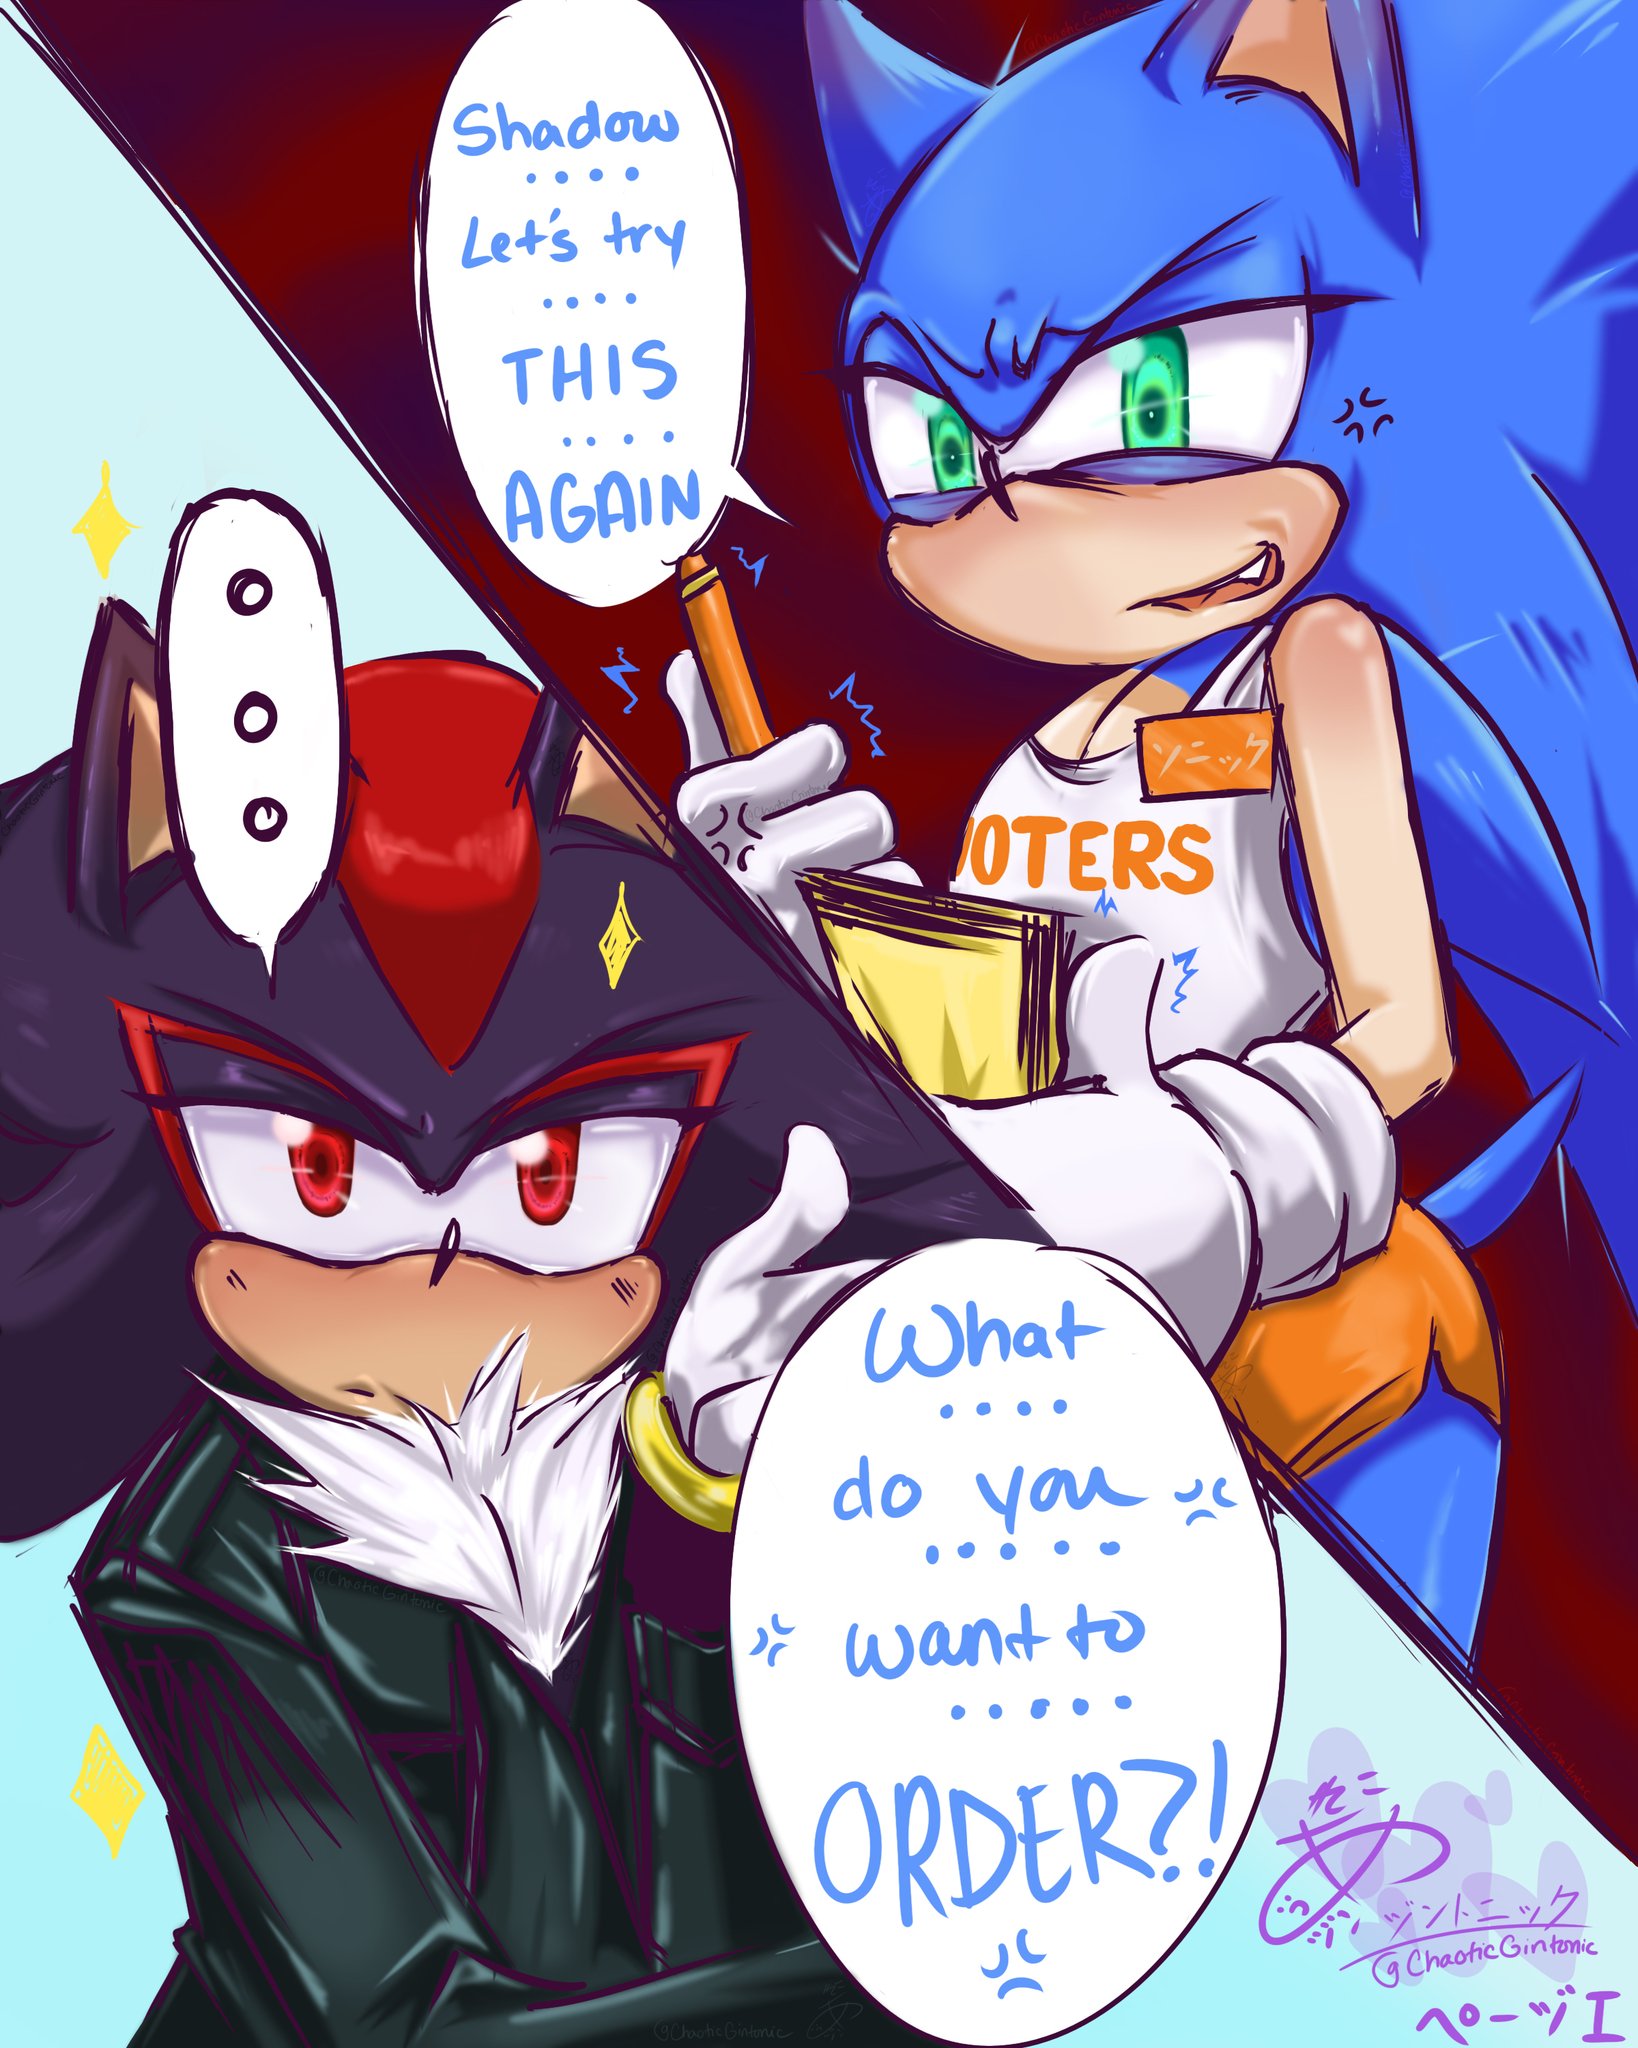 ℌ𝔦𝔪𝔦𝔱𝔰𝔲 (COMMS OPEN) on X: Meme reference Spoilers for Sonic Prime  Season 3 lol #sonadow #shadonic #sonic #shadow #sonicfanart #sonicprime  #tailsnine  / X